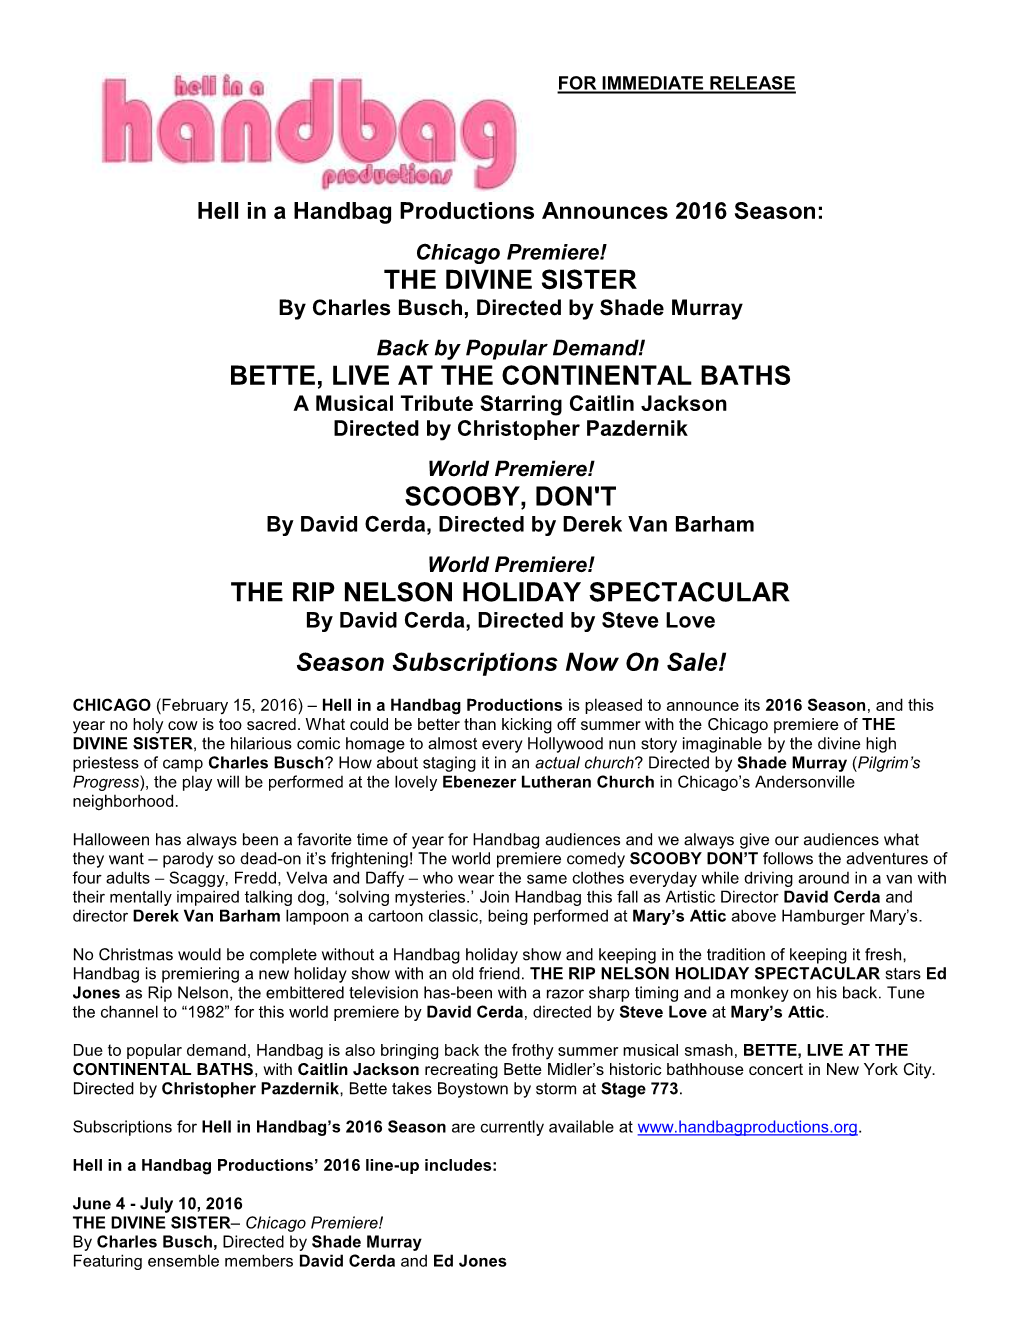 BETTE, LIVE at the CONTINENTAL BATHS a Musical Tribute Starring Caitlin Jackson Directed by Christopher Pazdernik